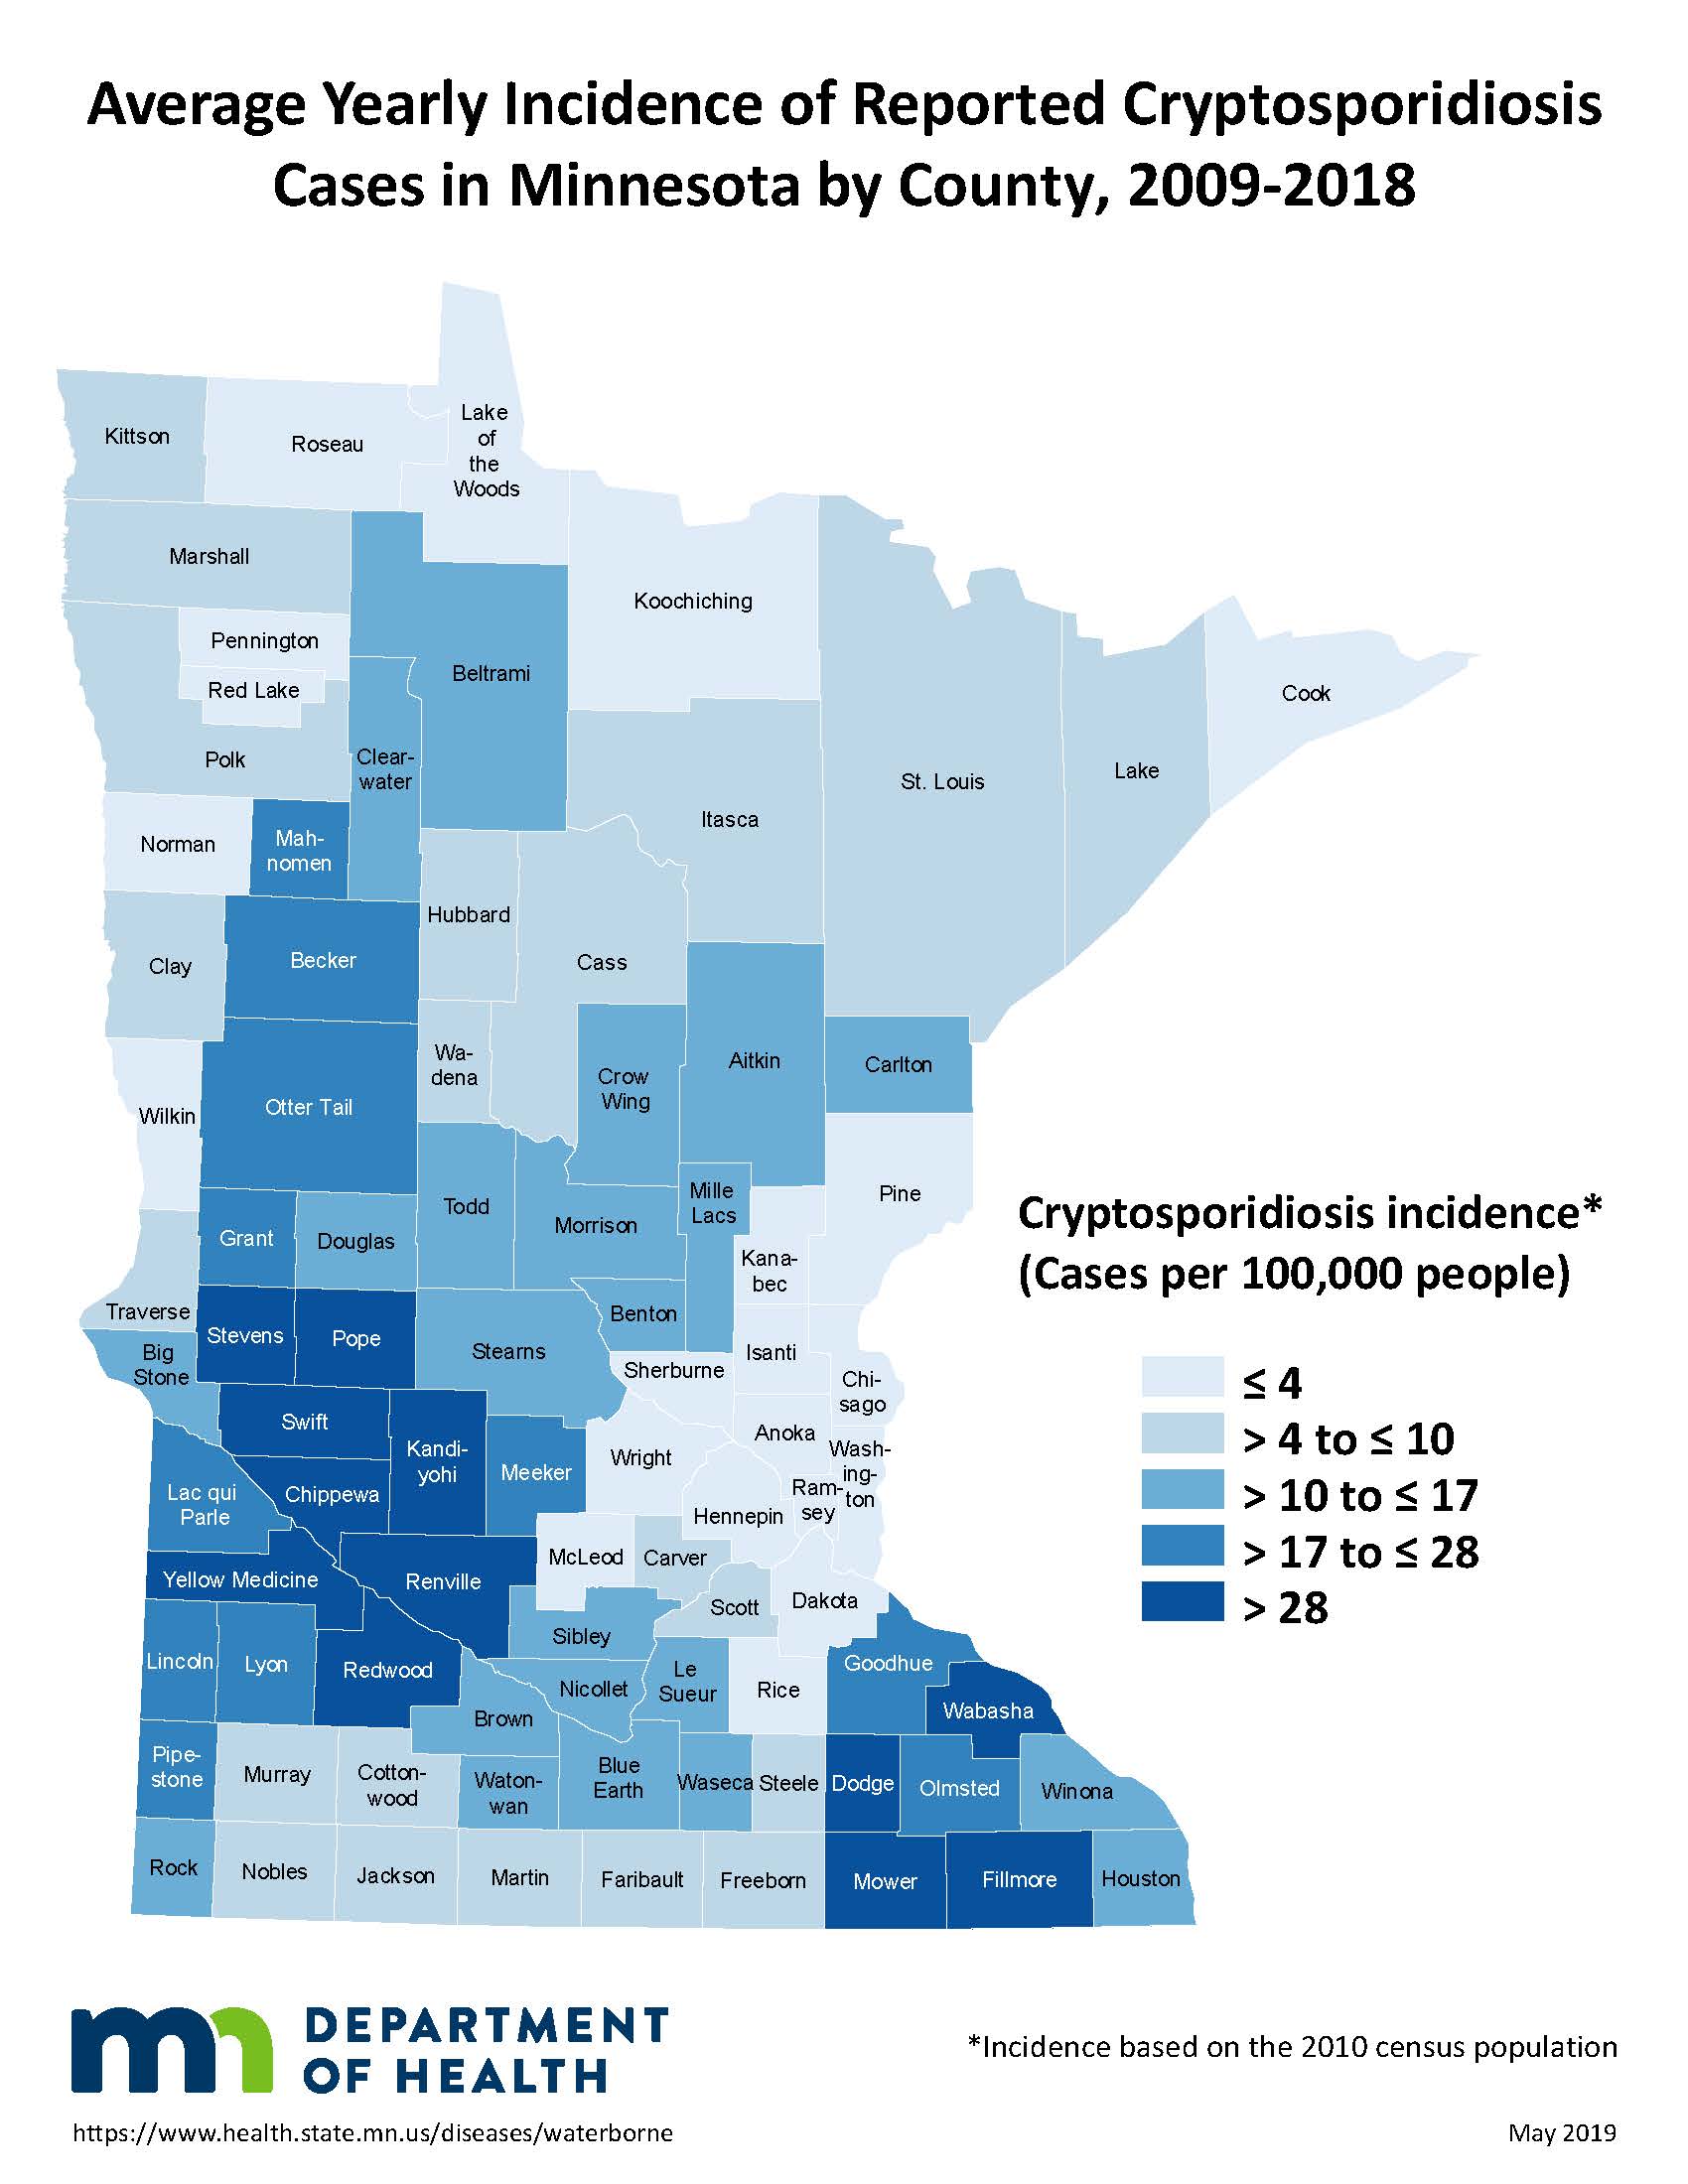 Average yearly incidence of reported crypto cases in Minnesota by county, 2009-2018